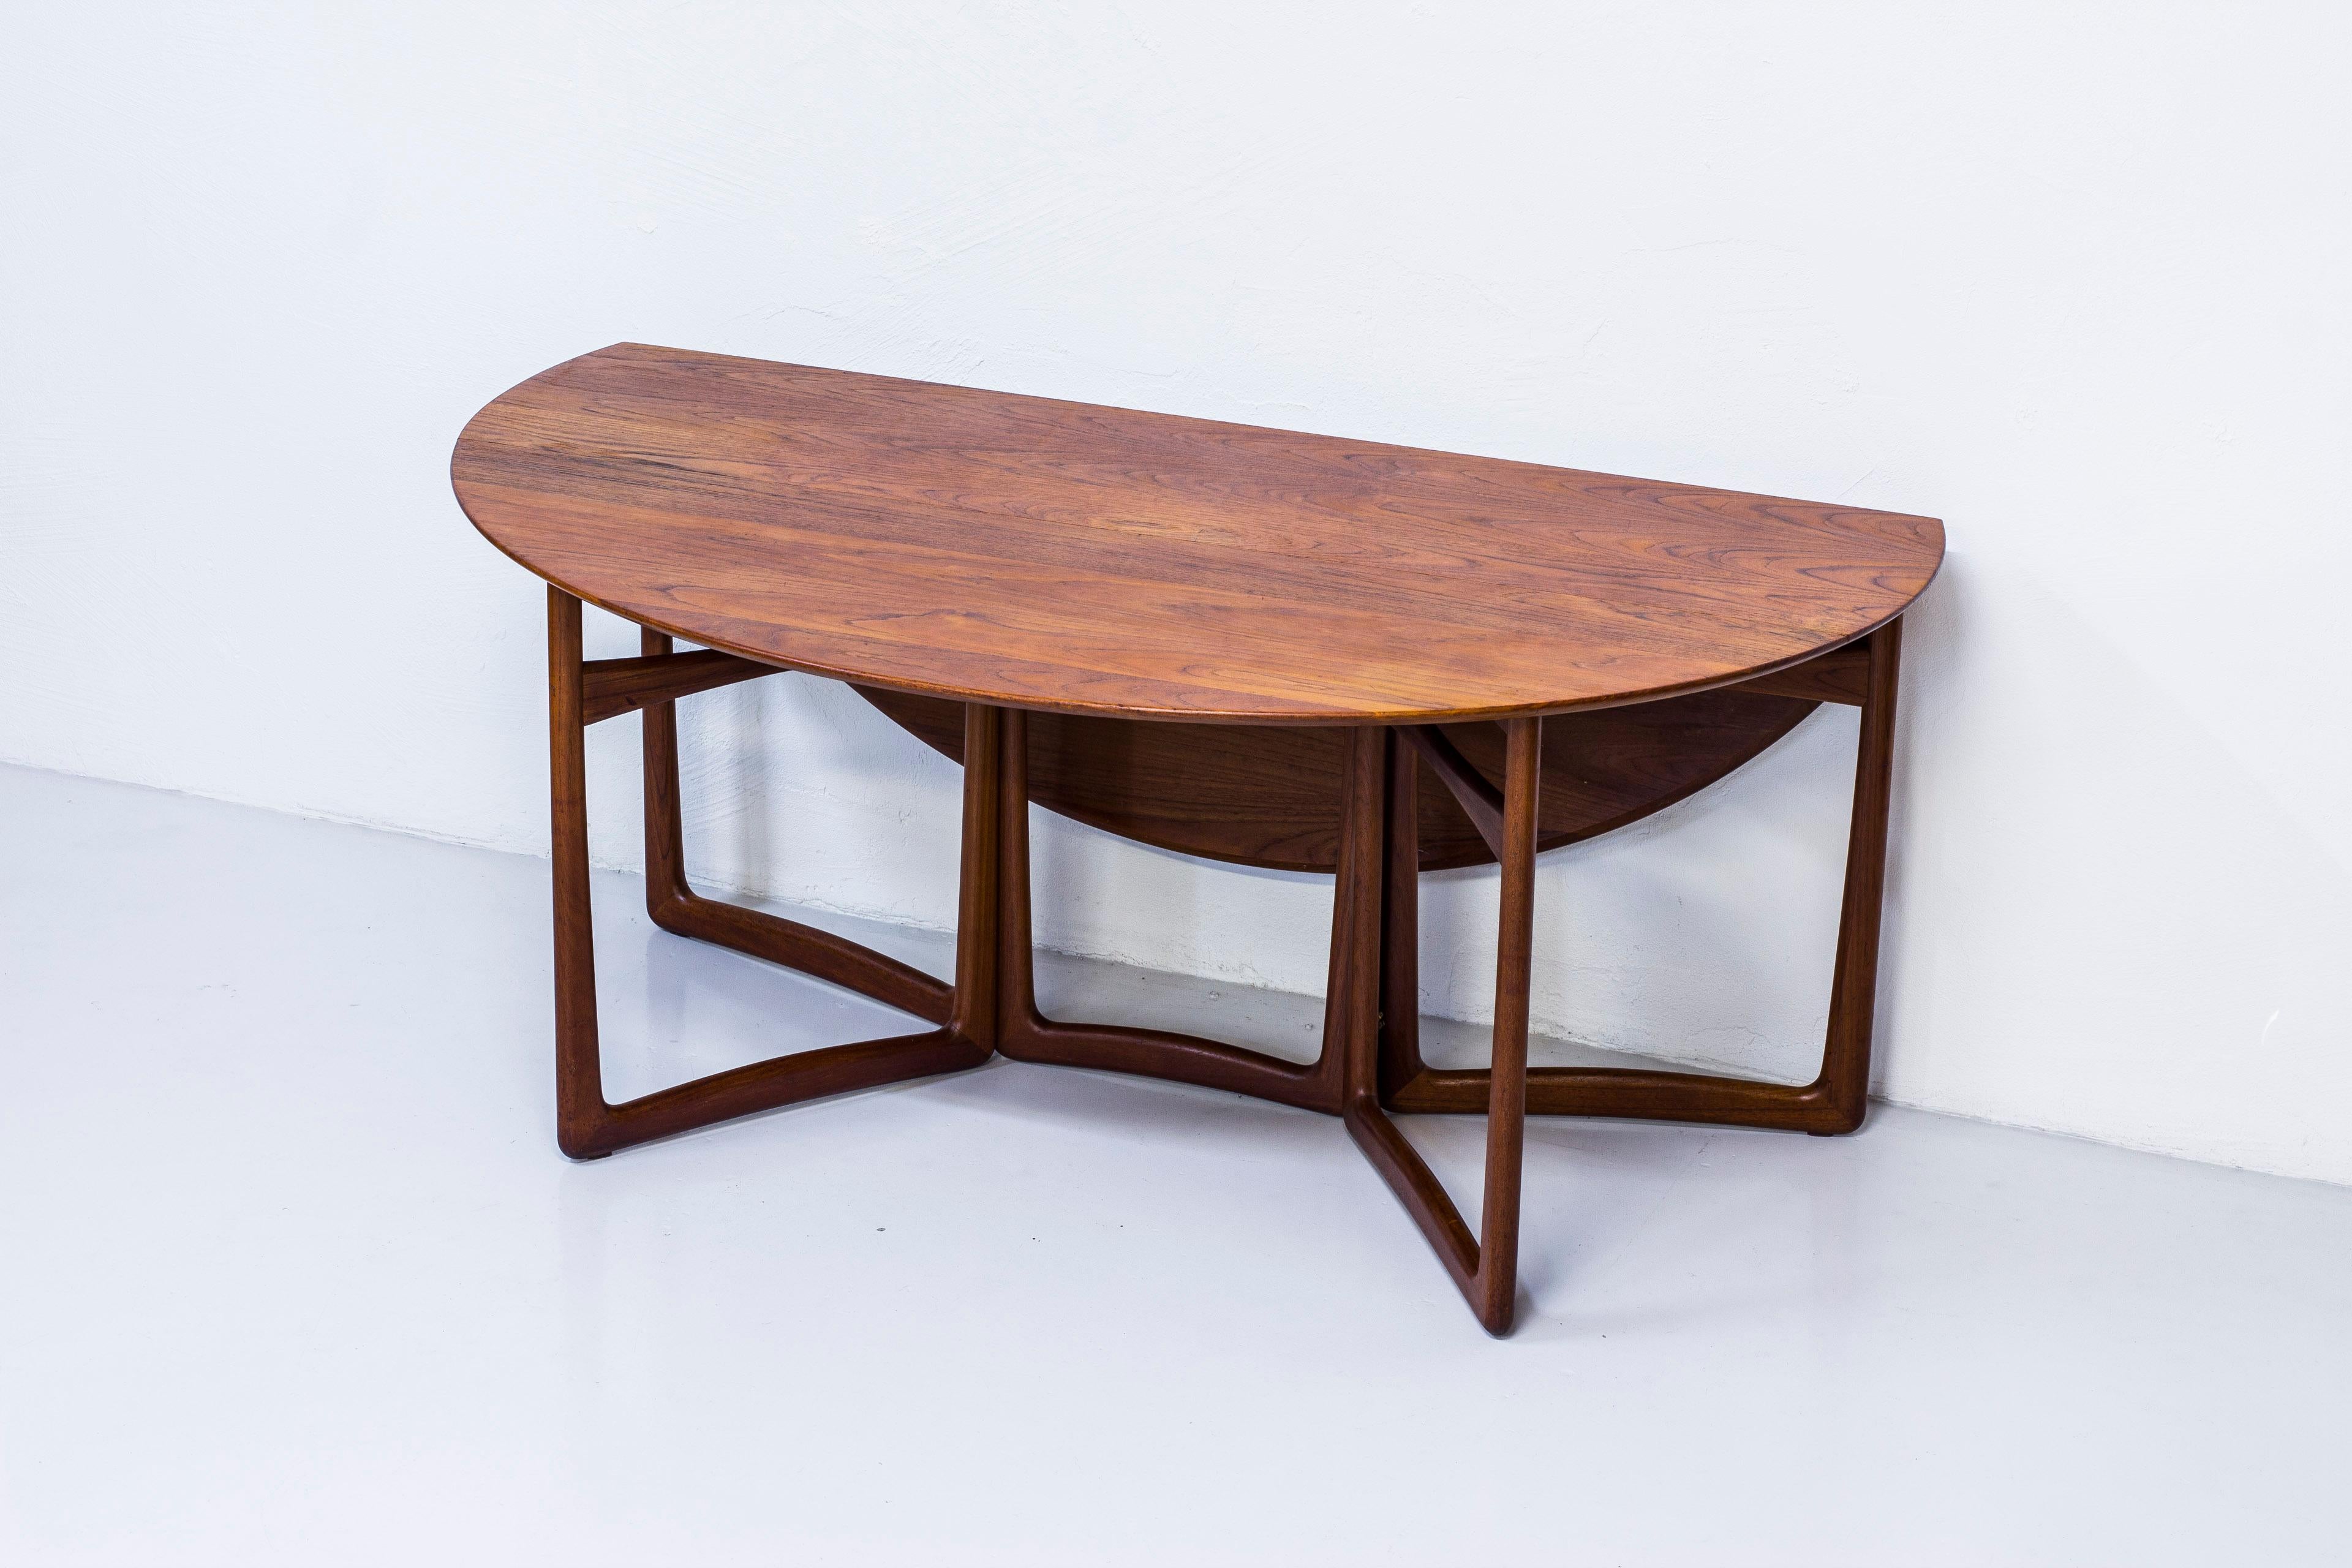 Drop leaf dining table designed by Peter Hvidt & Orla Mølgaard Nielsen. produced by France & Søn in Denmark during the 1950s. Made entirely from solid teak wood with brass details. Very good vintage condition with signs of age related use and light